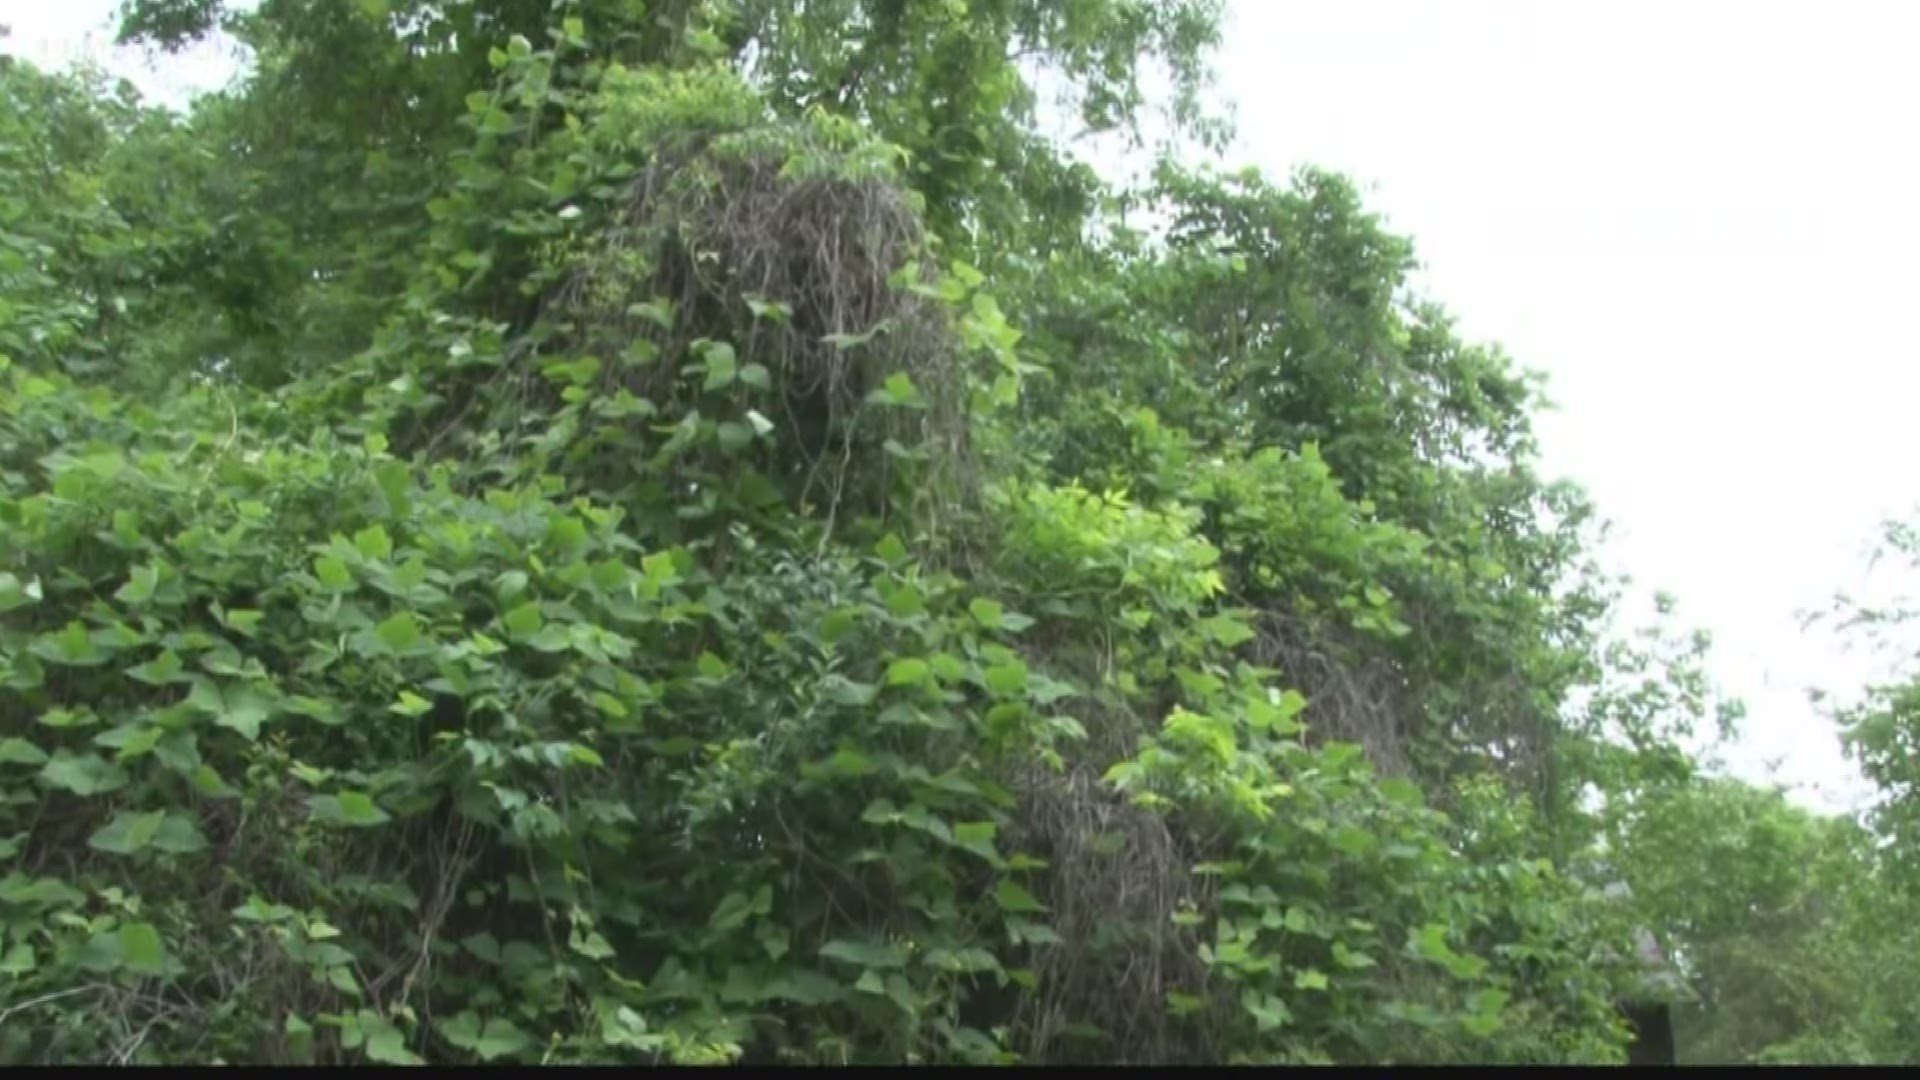 It's springtime, which means flowers are finally blooming, but you've also got to watch out for those pesky weeds. One Jones County woman's yard is under attack by an invasive species--Kudzu.